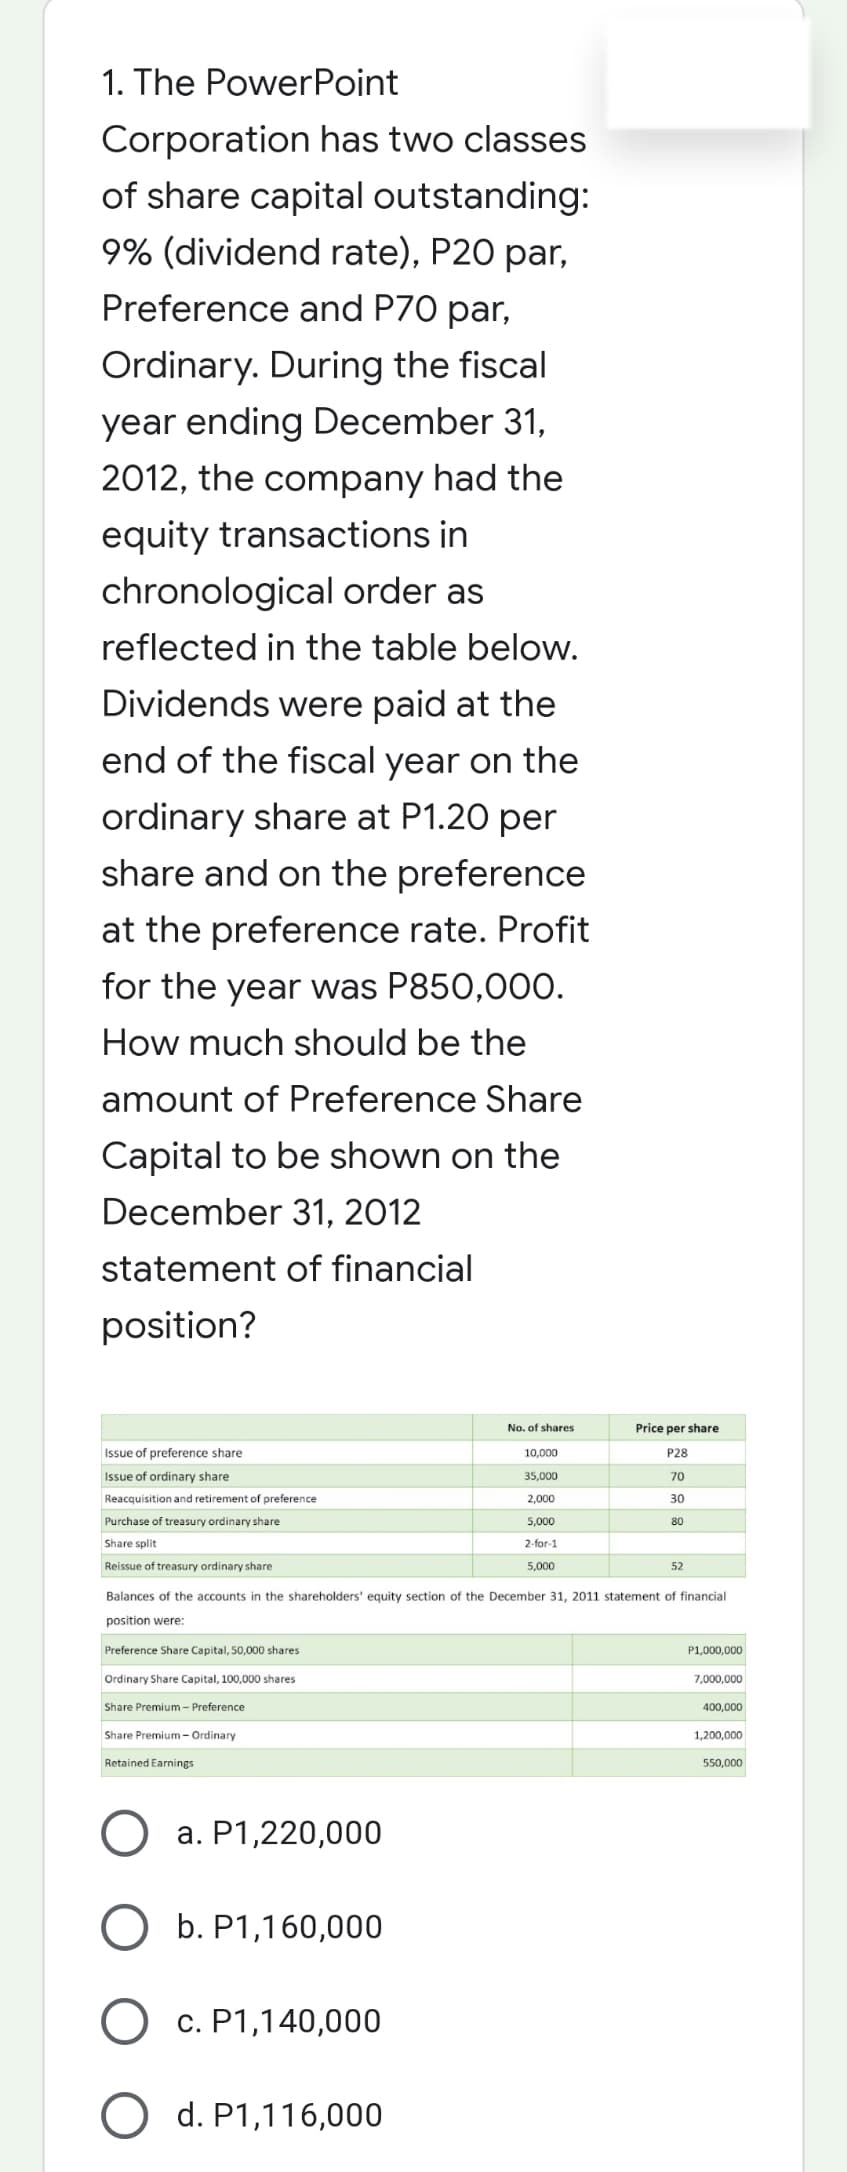 1. The PowerPoint
Corporation has two classes
of share capital outstanding:
9% (dividend rate), P20 par,
Preference and P70 par,
Ordinary. During the fiscal
year ending December 31,
2012, the company had the
equity transactions in
chronological order as
reflected in the table below.
Dividends were paid at the
end of the fiscal year on the
ordinary share at P1.20 per
share and on the preference
at the preference rate. Profit
for the year was P850,000.
How much should be the
amount of Preference Share
Capital to be shown on the
December 31, 2012
statement of financial
position?
No. of shares
Price per share
Issue of preference share
10,000
P28
Issue of ordinary share
35,000
70
Reacquisition and retirement of preference
2,000
30
Purchase of treasury ordinary share
5,000
80
Share split
2-for-1
Reissue of treasury ordinary share.
5,000
52
Balances of the accounts in the shareholders' equity section of the December 31, 2011 statement of financial
position were:
Preference Share Capital, 50,000 shares
P1,000,000
Ordinary Share Capital, 100,000 shares
7,000,000
Share Premium - Preference
400,000
Share Premium-Ordinary
1,200,000
Retained Earnings
550,000
a. P1,220,000
b. P1,160,000
O c. P1,140,000
d. P1,116,000